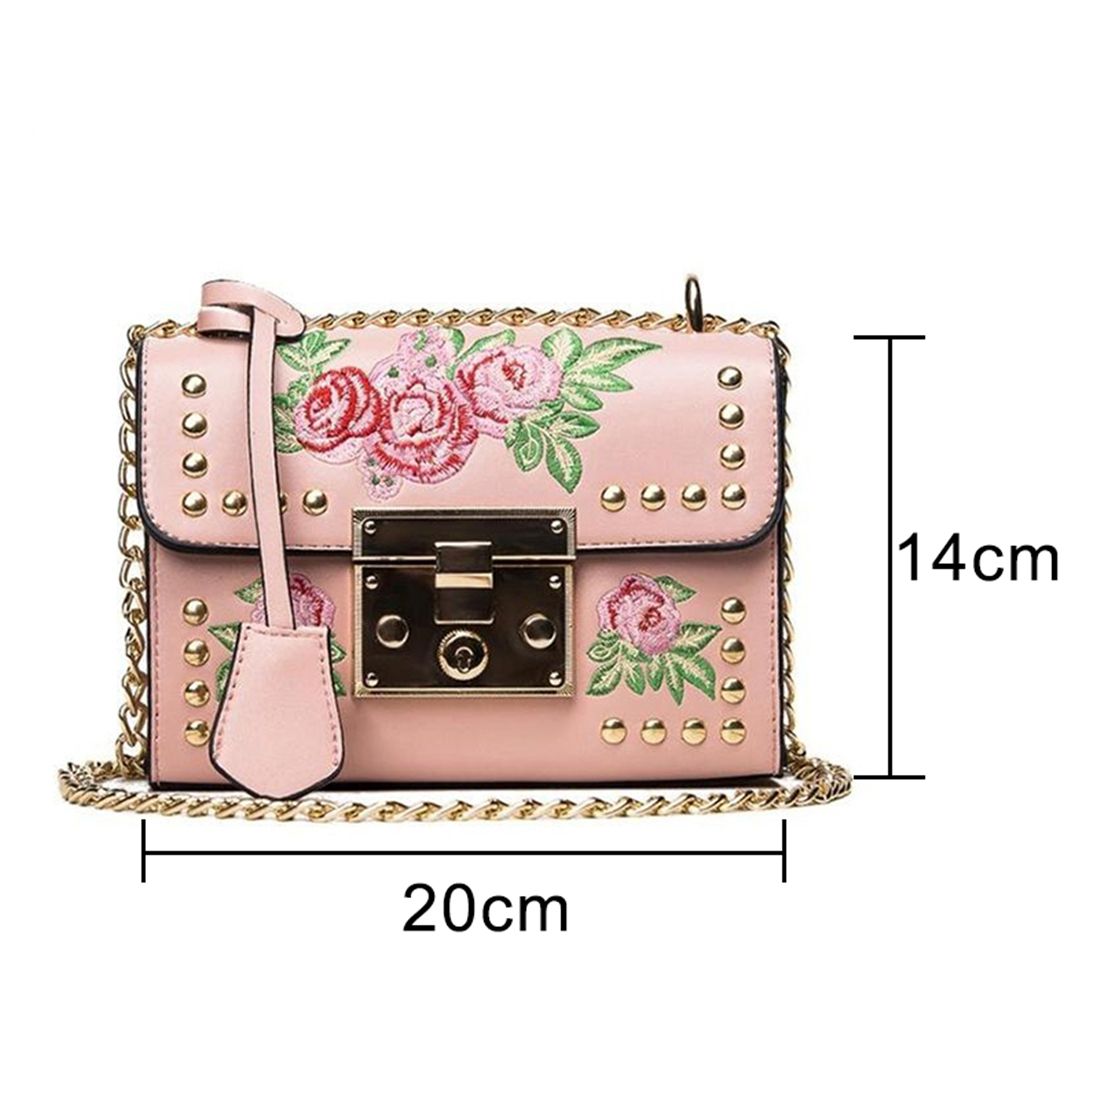 new PU leather handbag Messenger bag embroidery rivets lock embroidery chain bag tide national wind small square bag - ebowsos